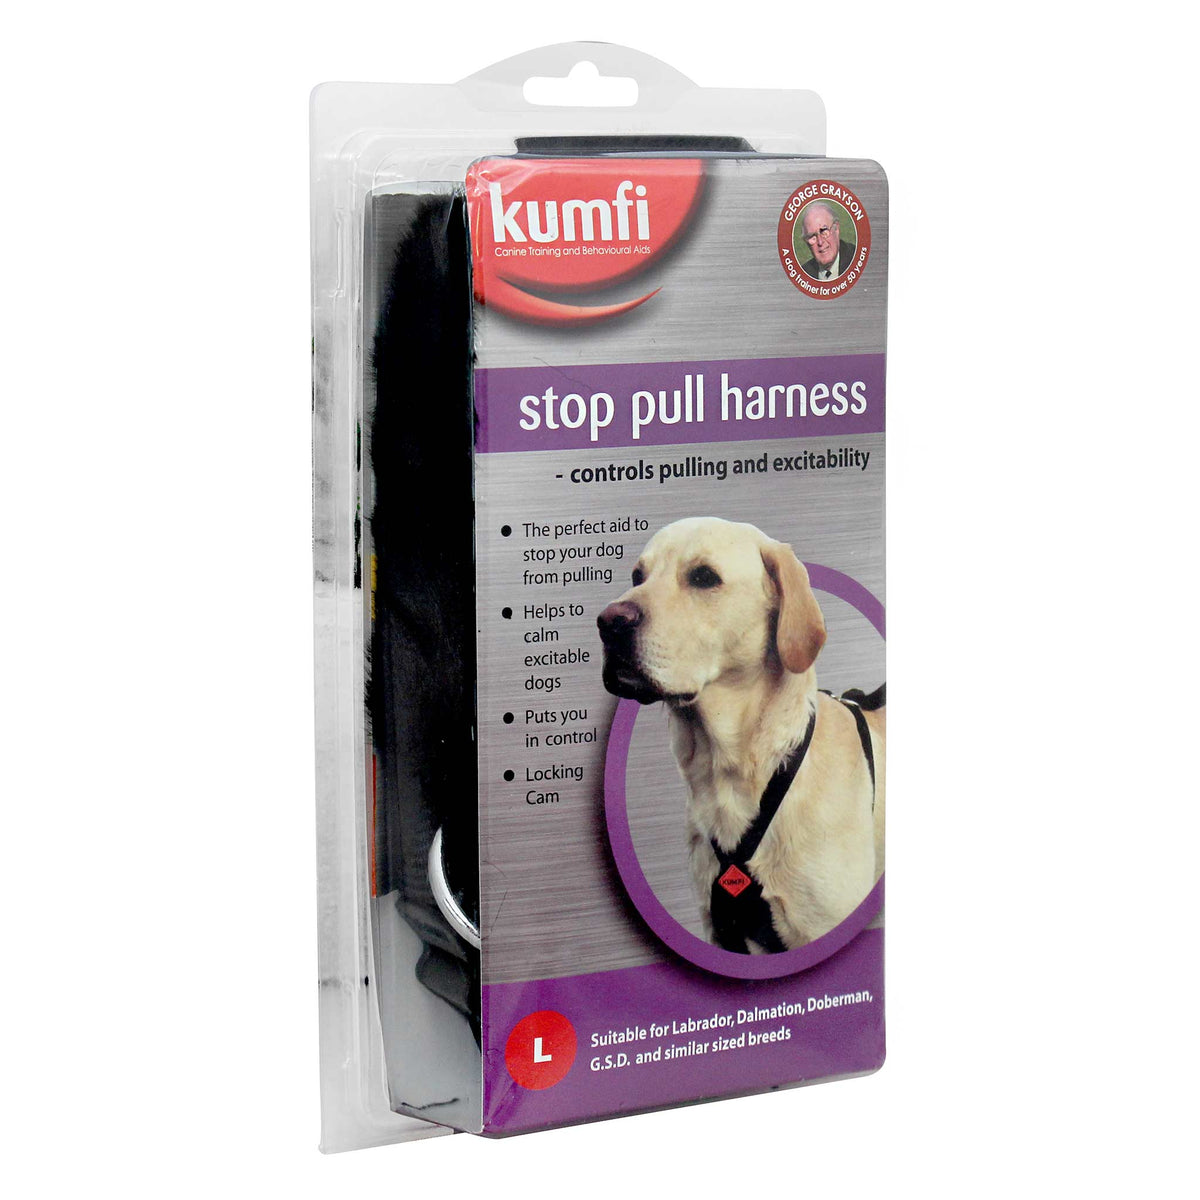 Kumfi Stop Pull Harness for Dogs